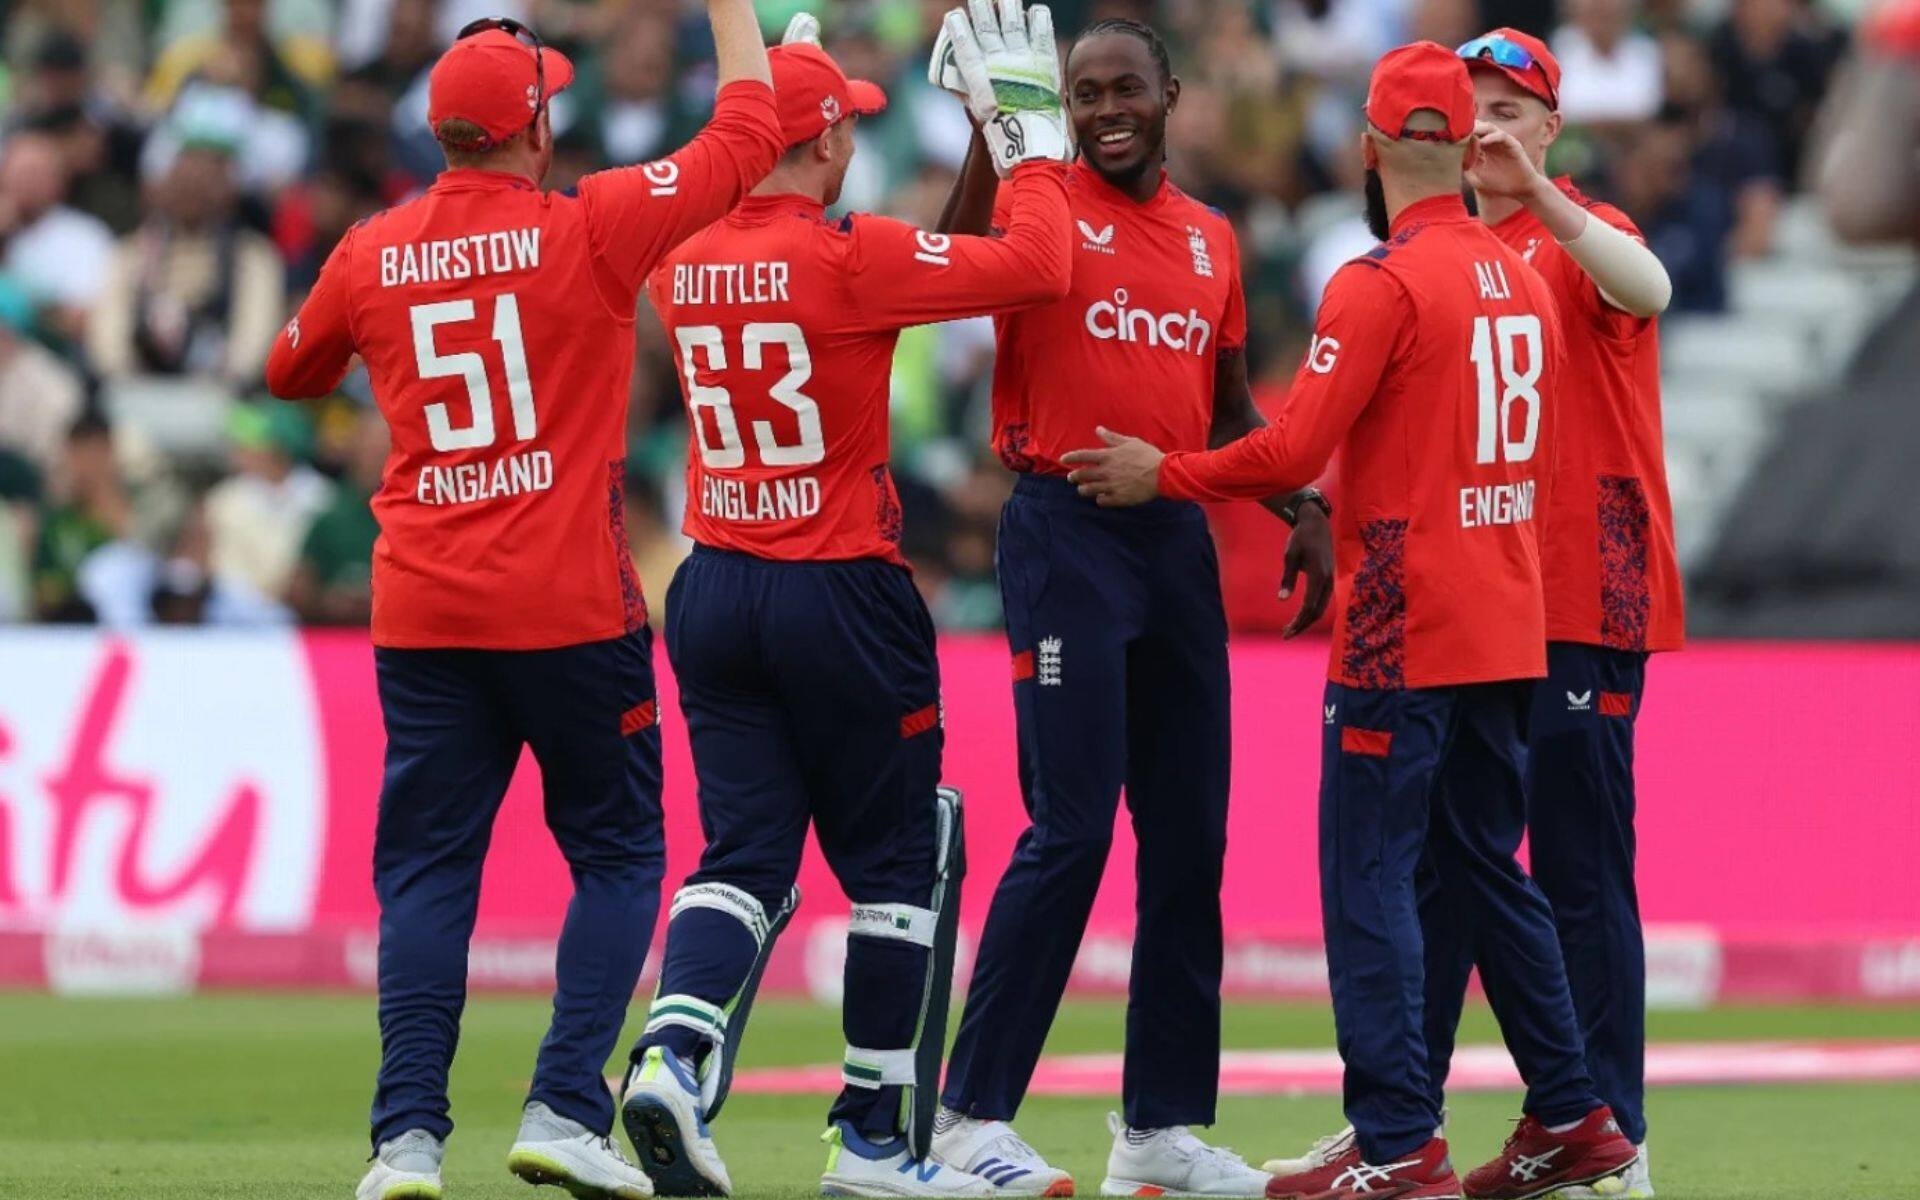 England players celebrating a PAK wicket in first T20I (x.com)